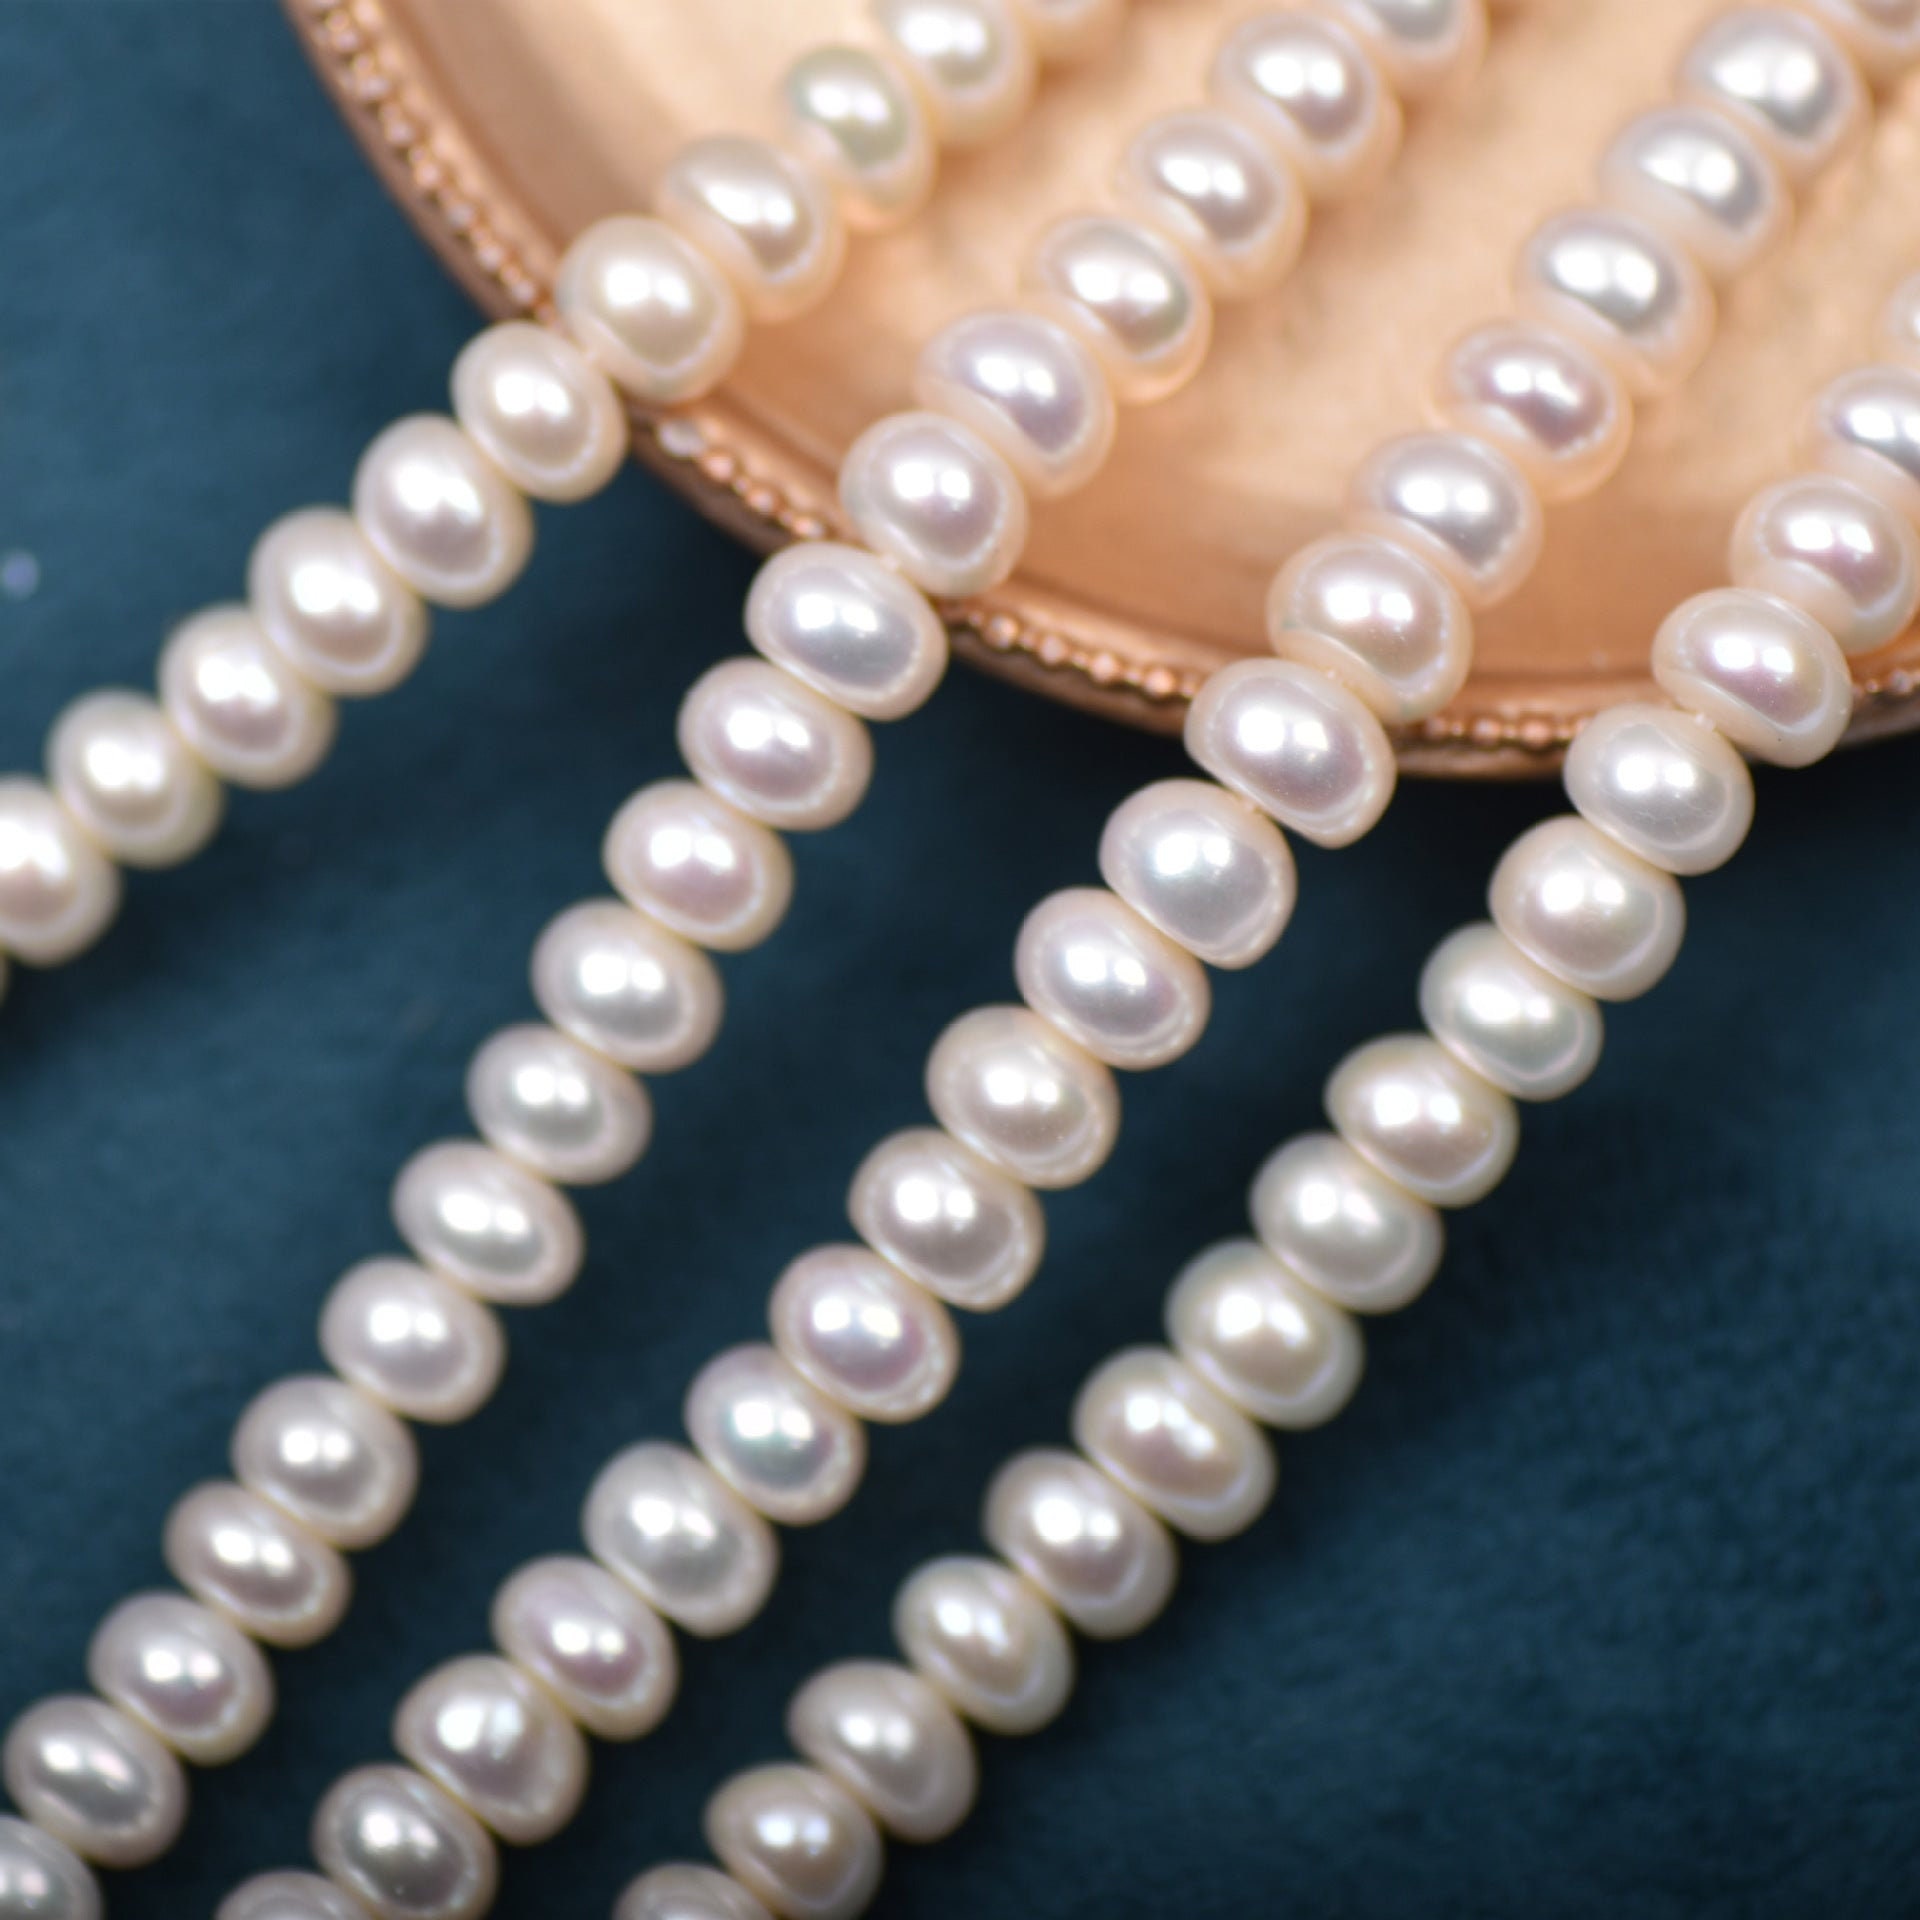 10m of 2.5mm Bead Pearl String (Ivory)